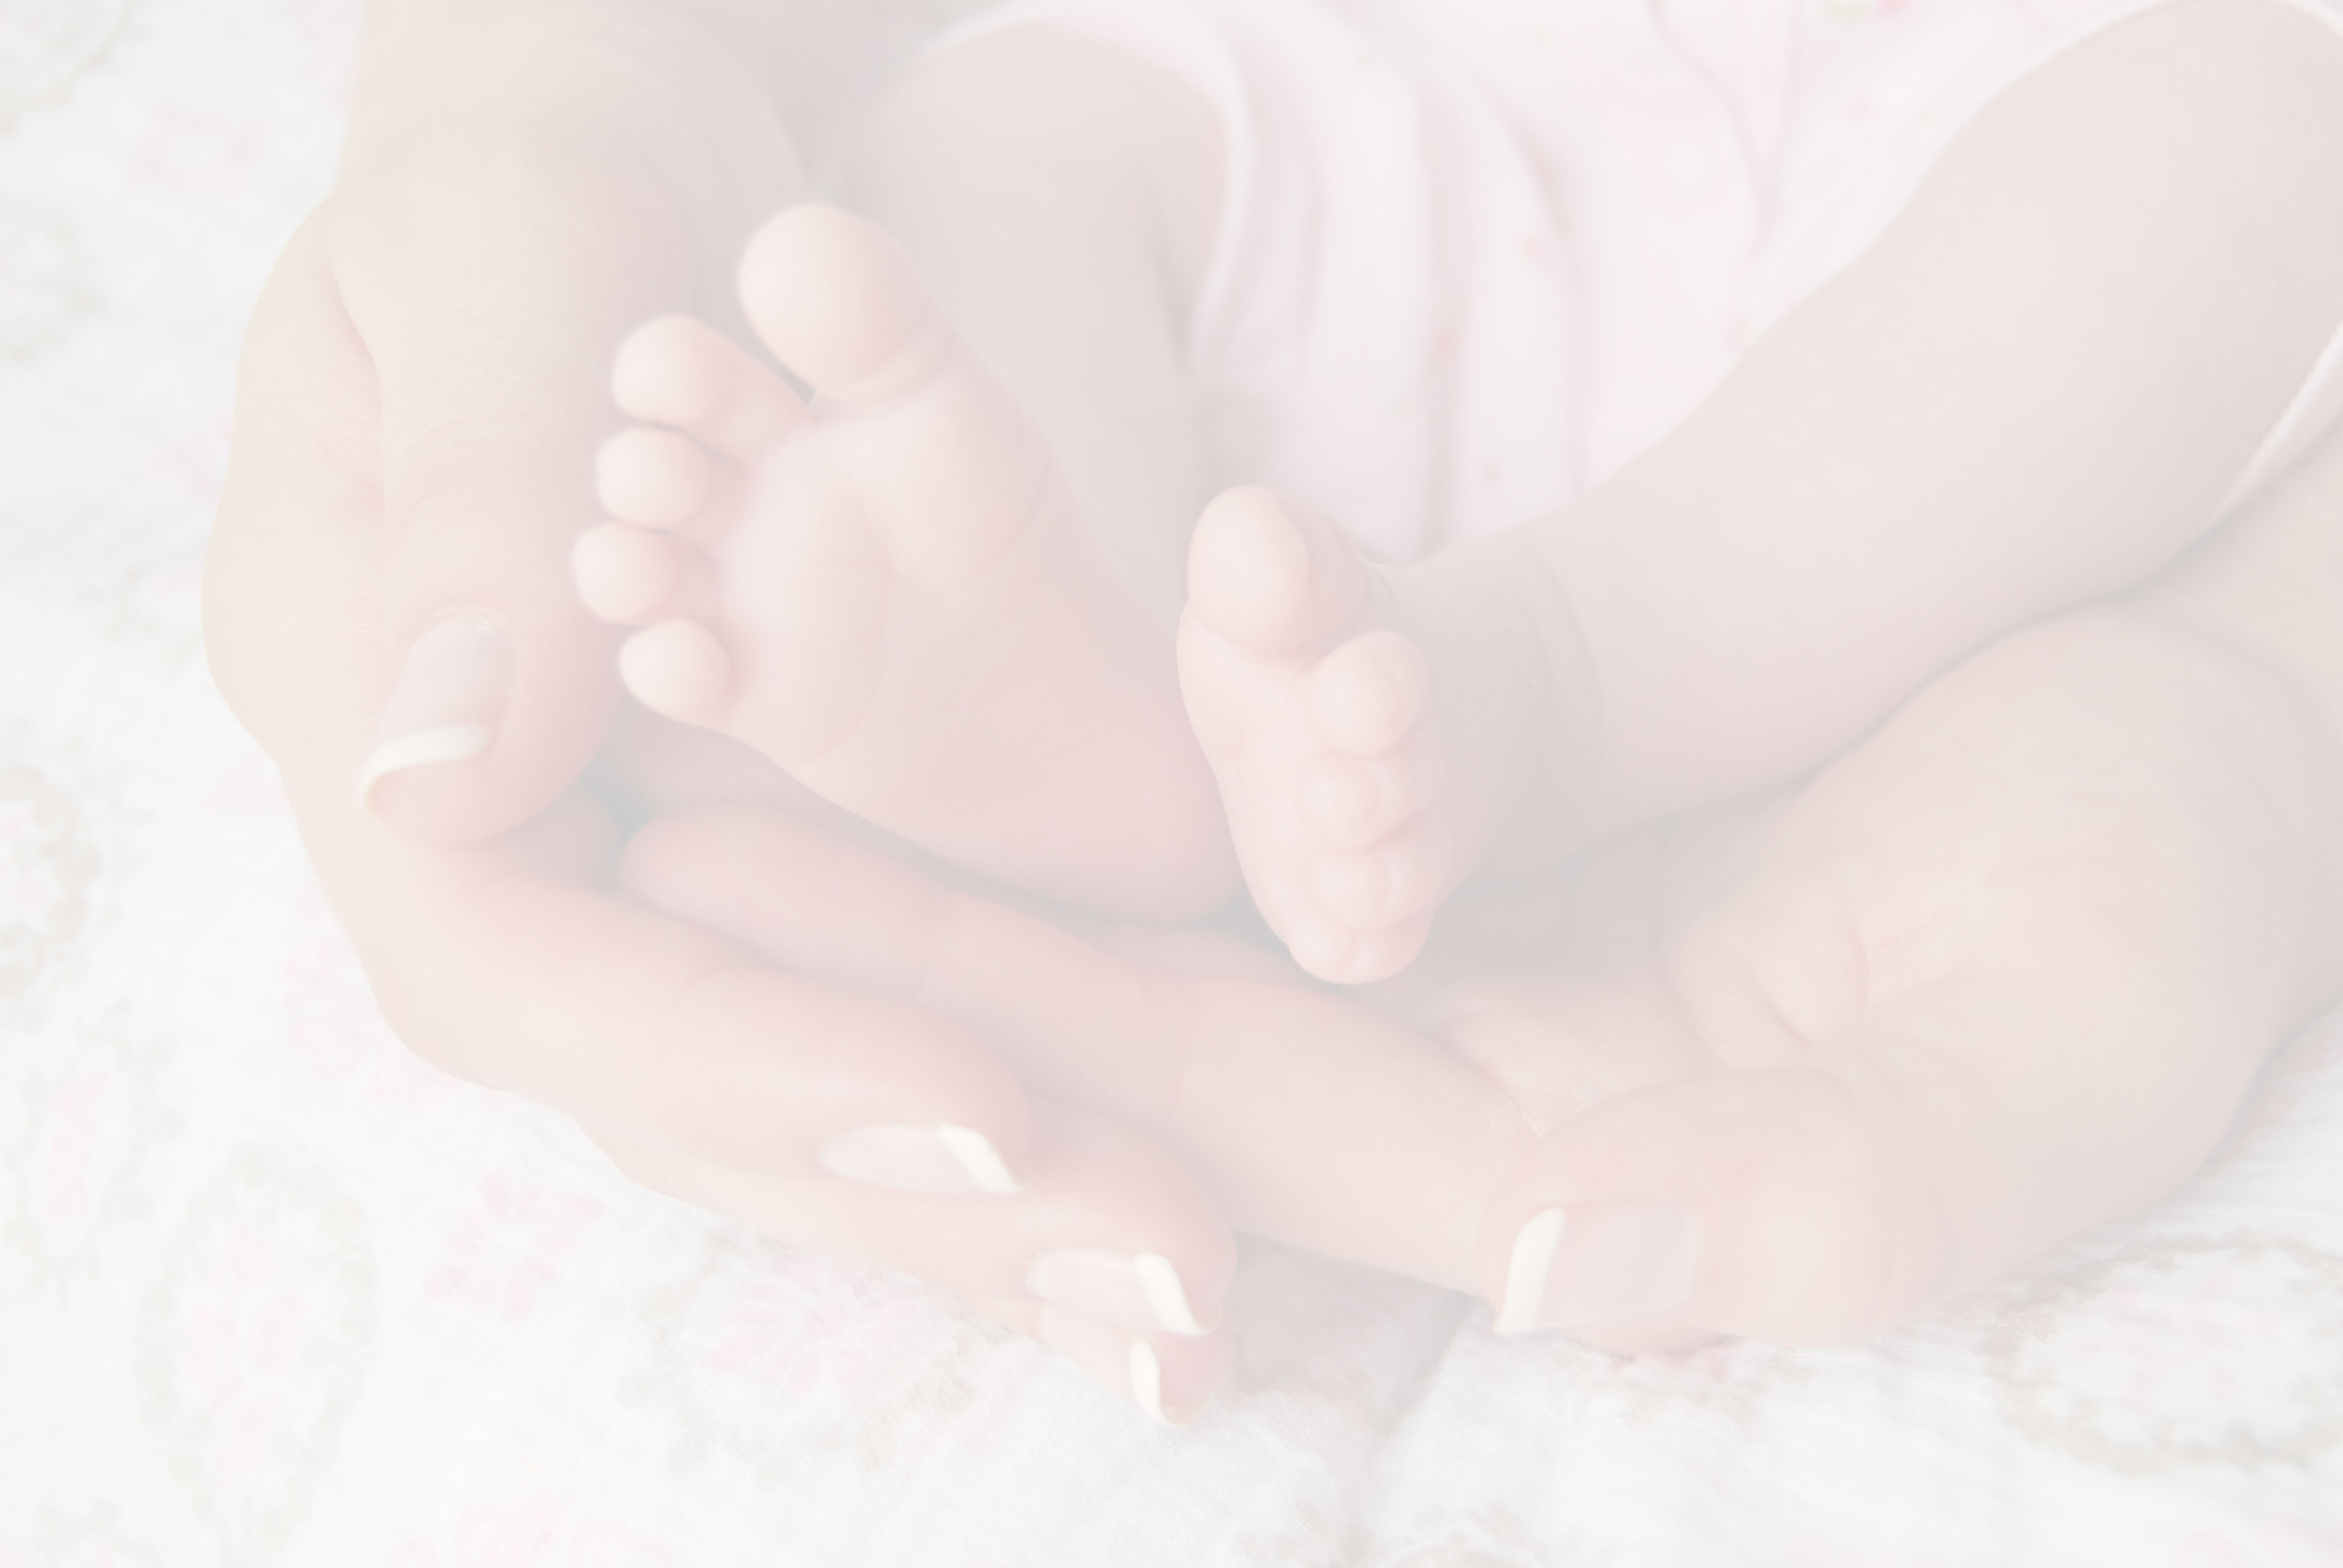 Faded photo of infant feet for AMS